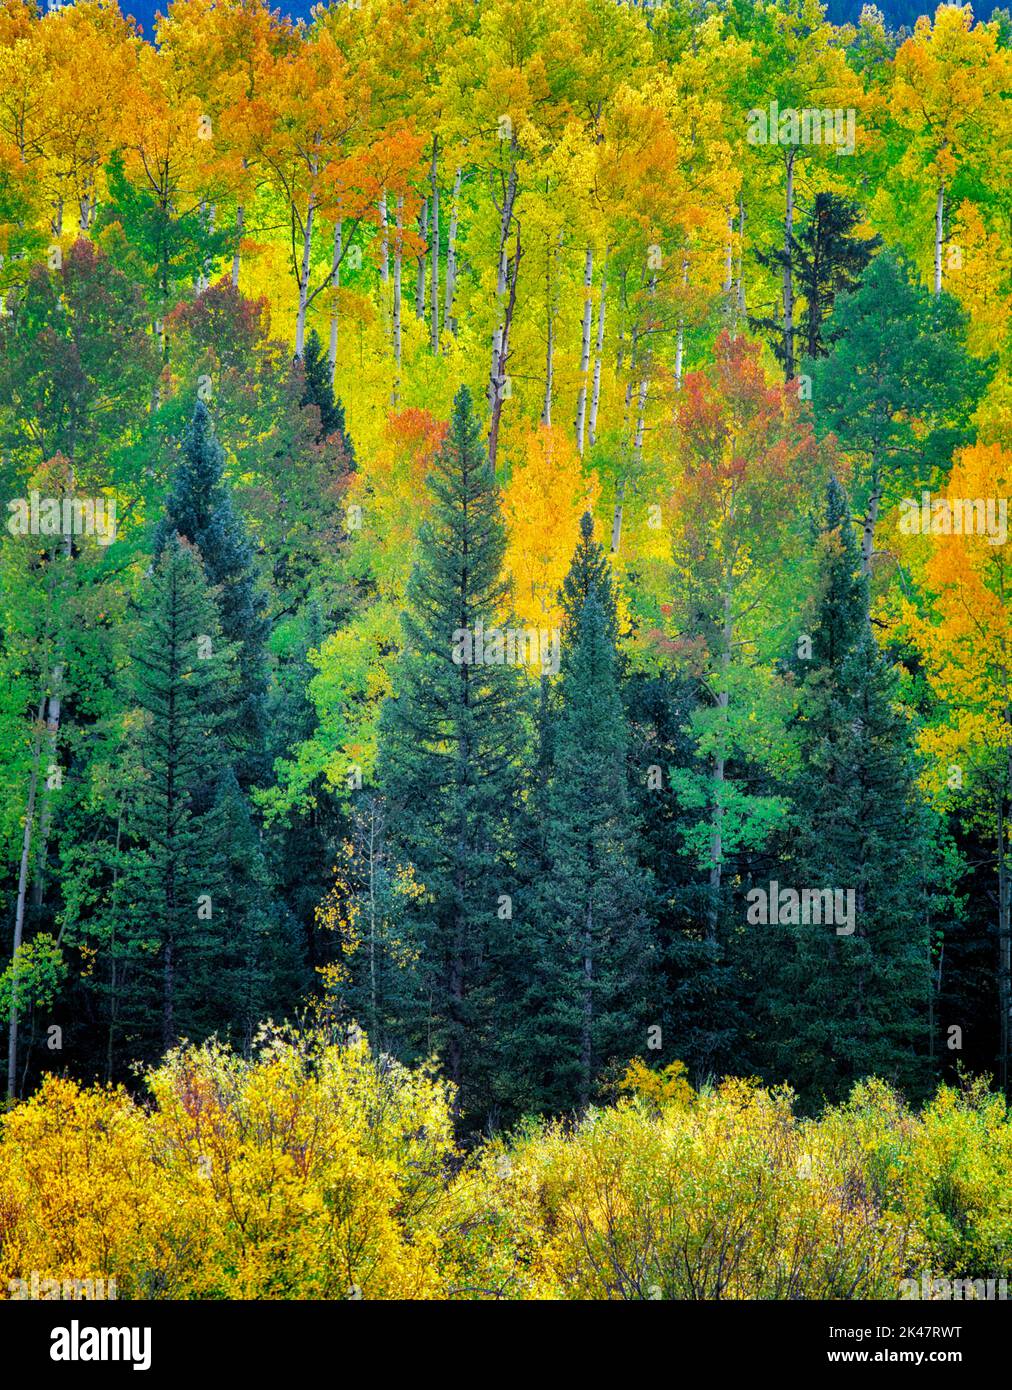 Mixed conifer and aspen forest in fall color. San Juan Mountains, Colorado Stock Photo